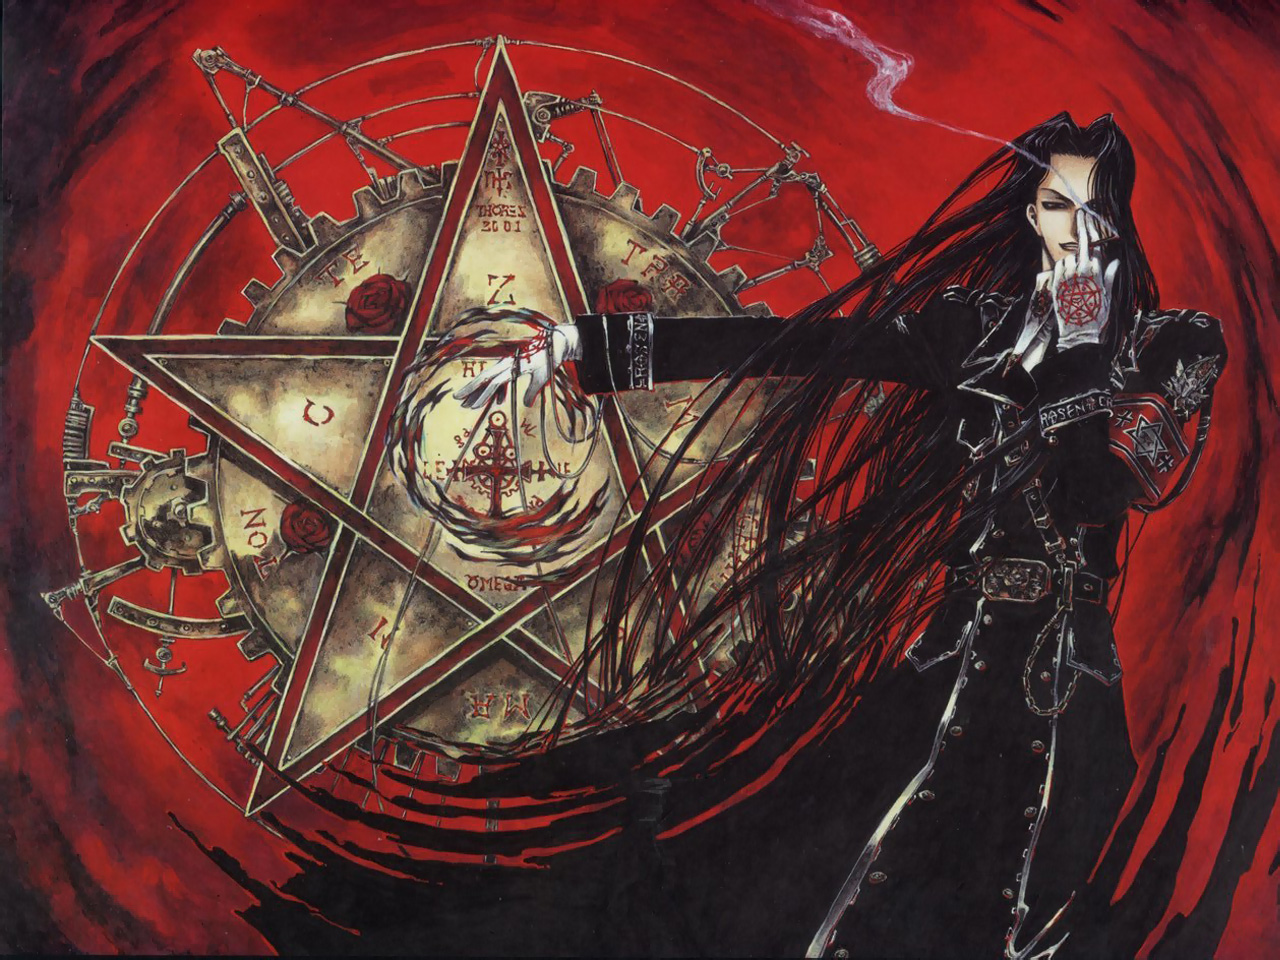 Trinity Blood Picture